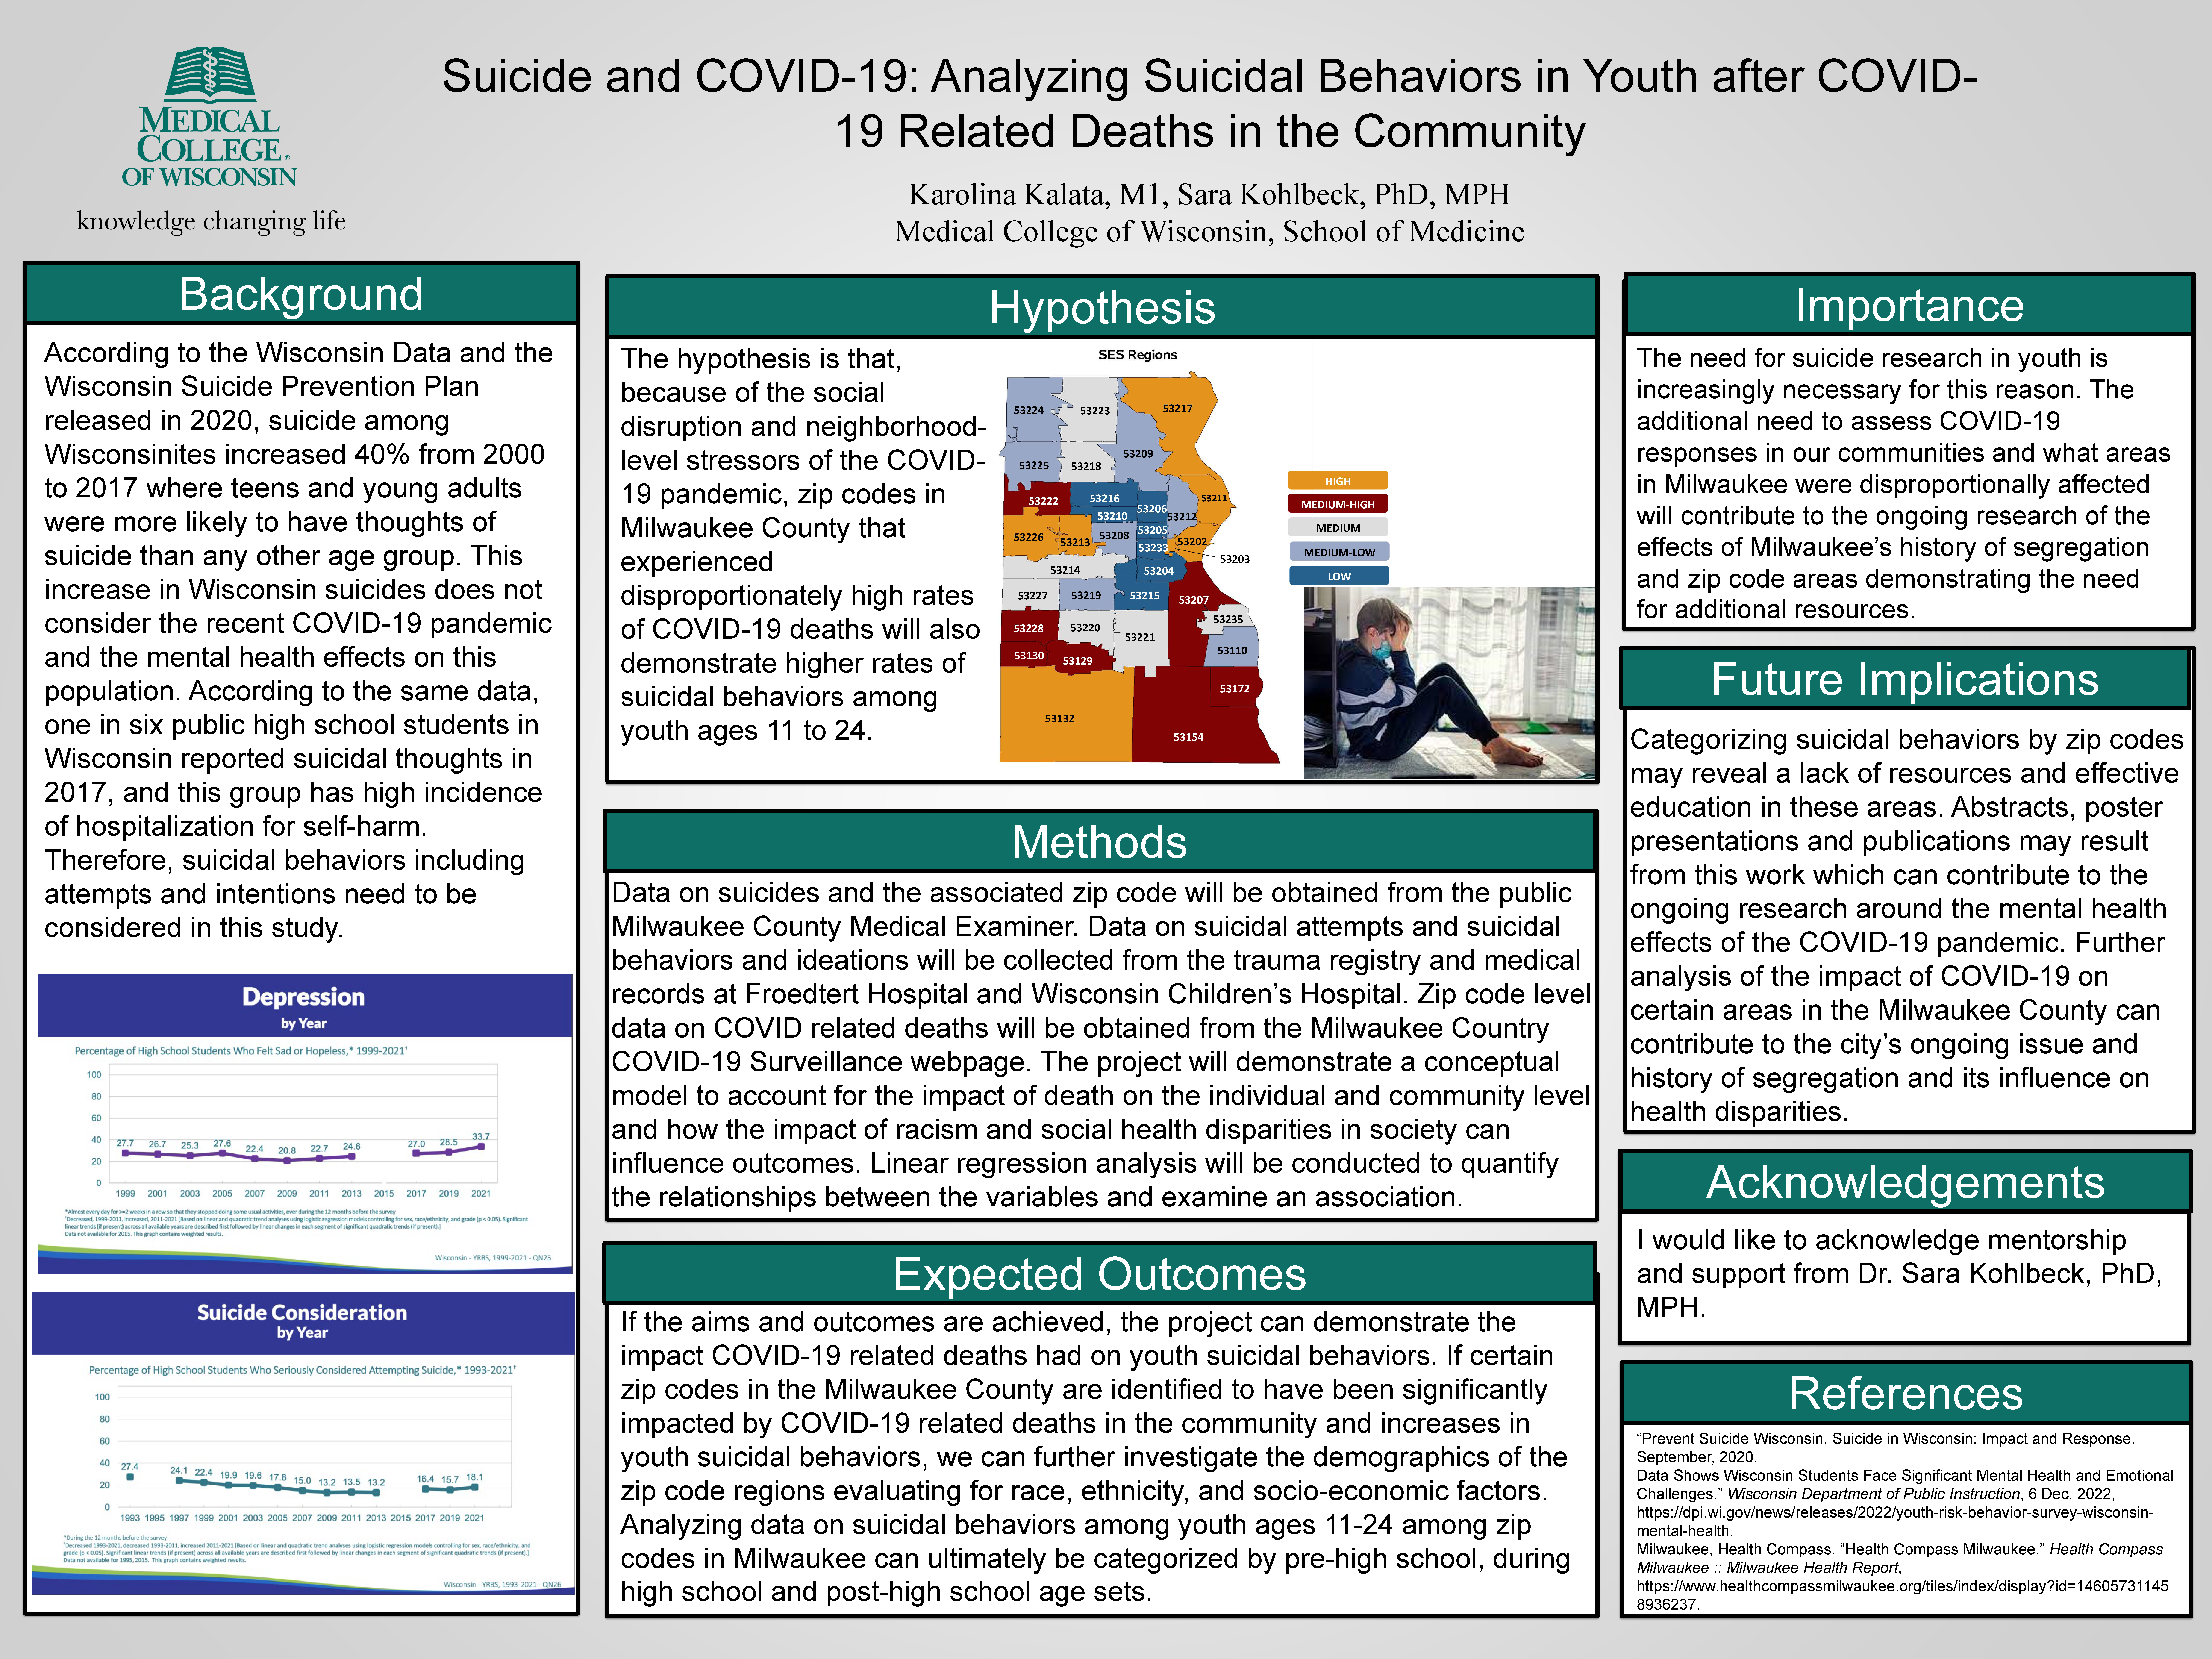 Suicide and COVID-19: Analyzing Suicidal Behaviors in Youth after COVID-19 Related Deaths in the Community. Karolina Kalata, kkalata@mcw.edu